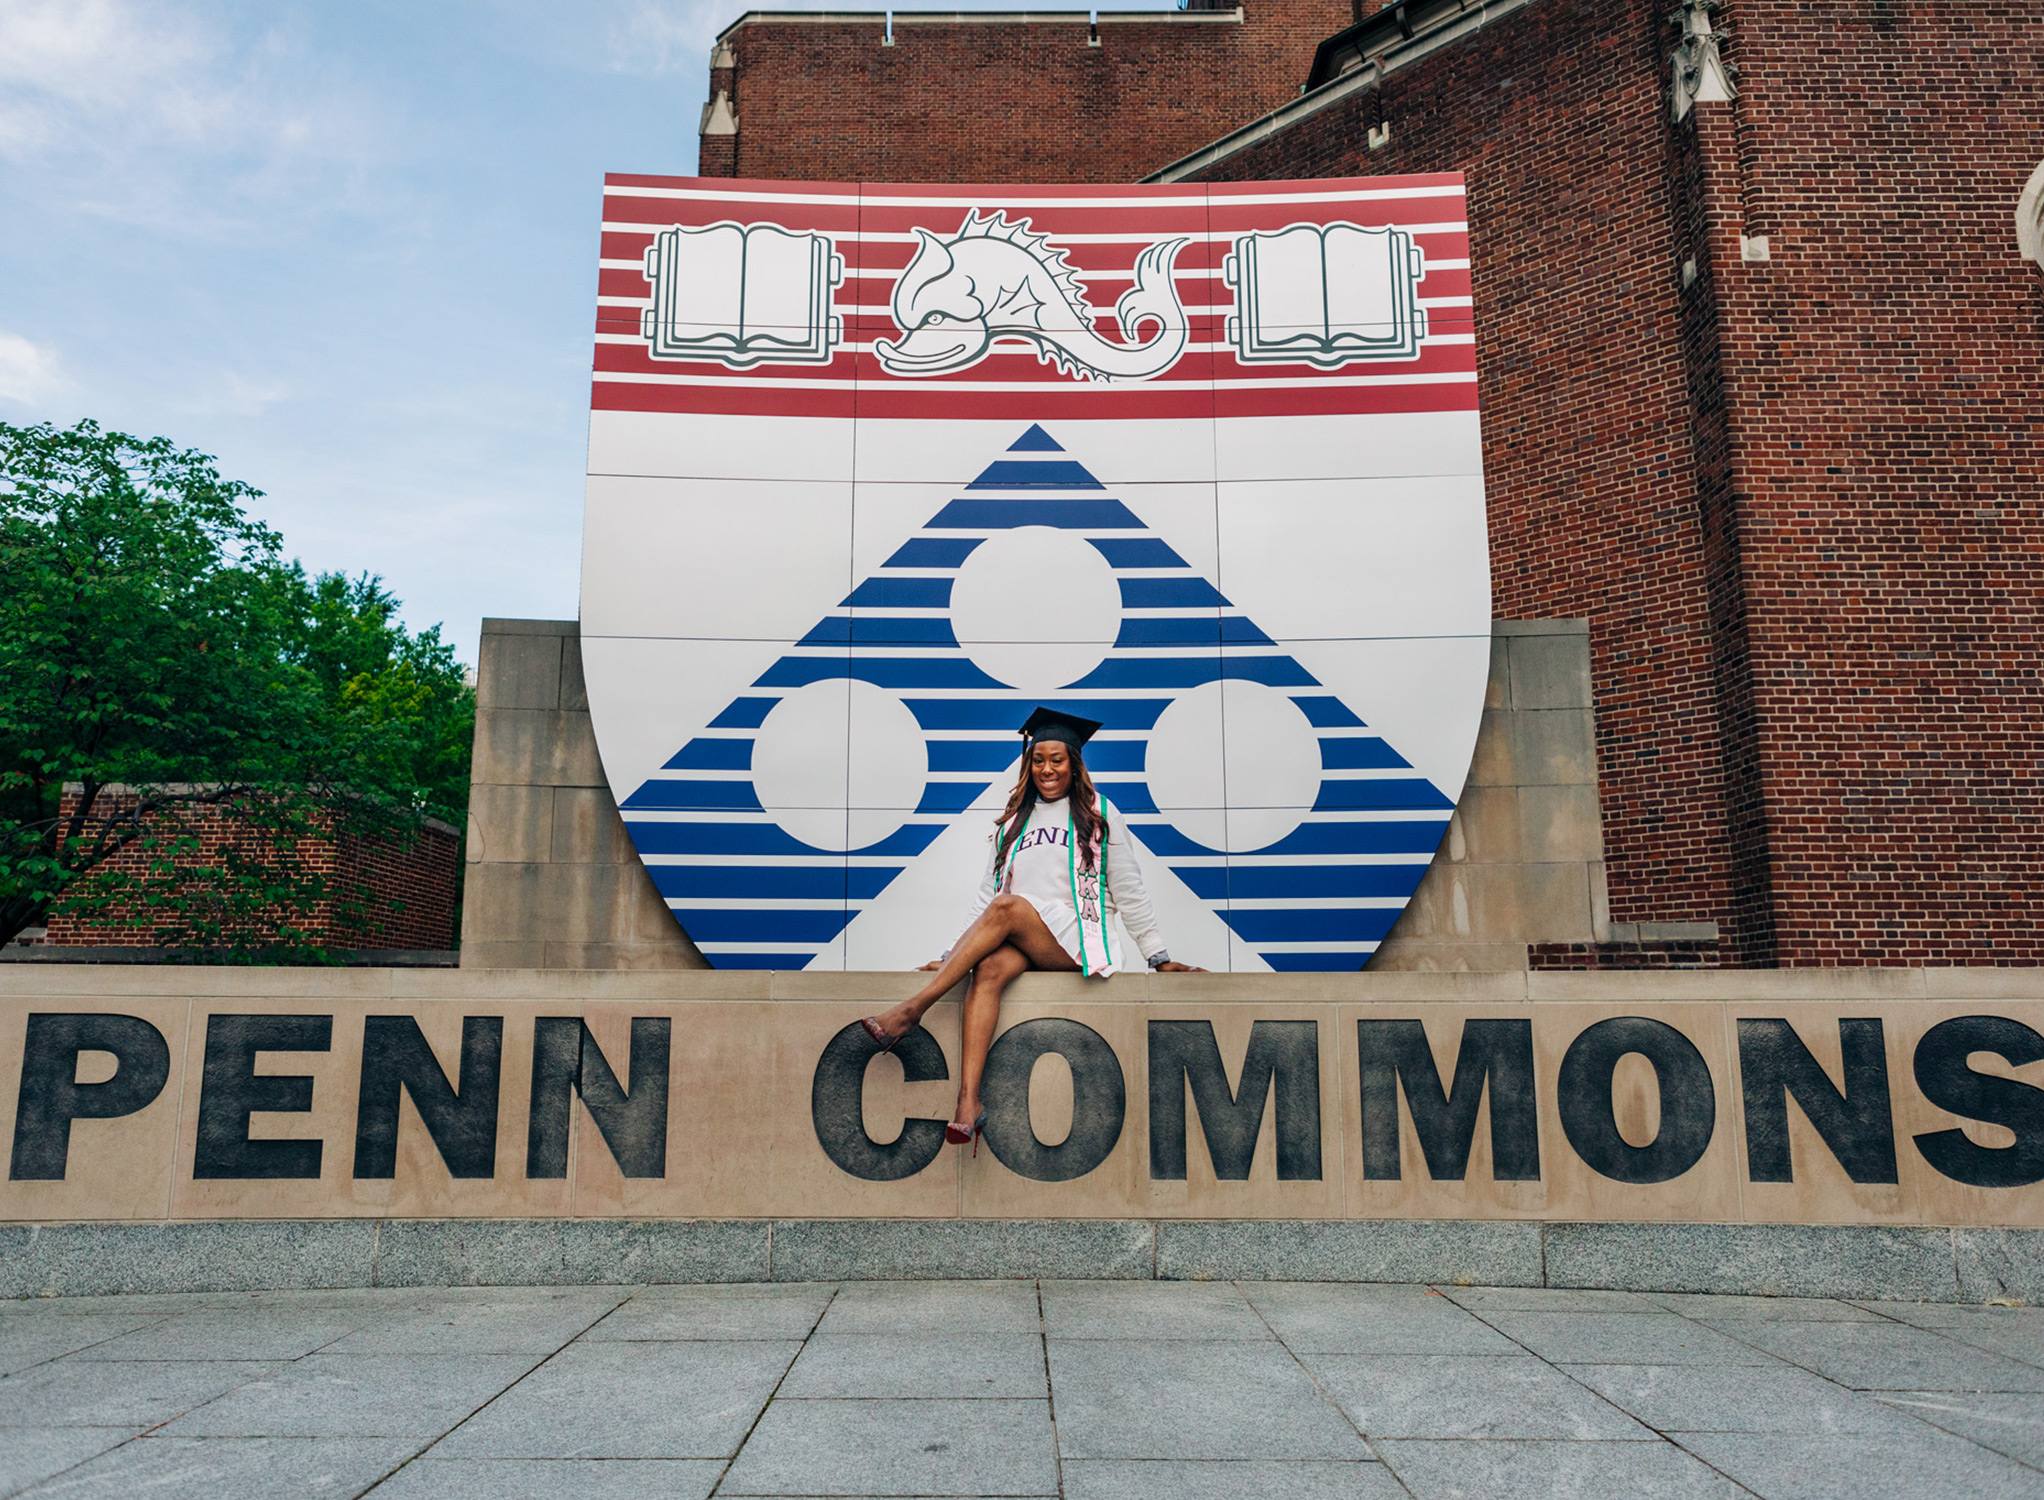 African American woman sits on a ledge at Penn Commons at the University of Pennsylvania in a white tennis outfit and a graduation cap